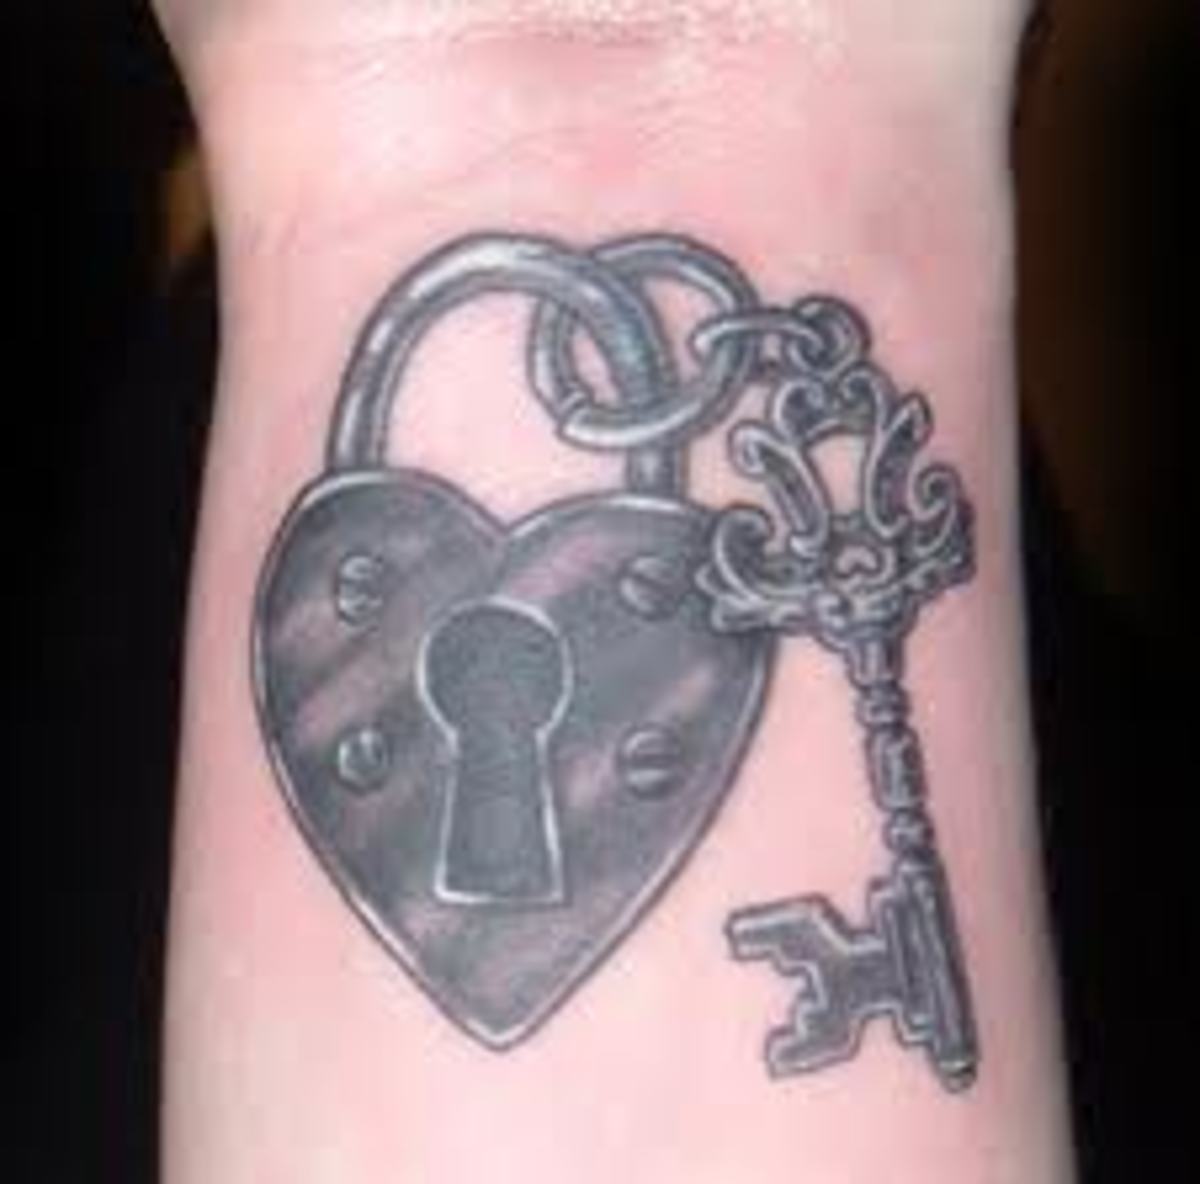 Key-and-Lock (and Key-and-Heart) Tattoo Designs and Meanings | TatRing